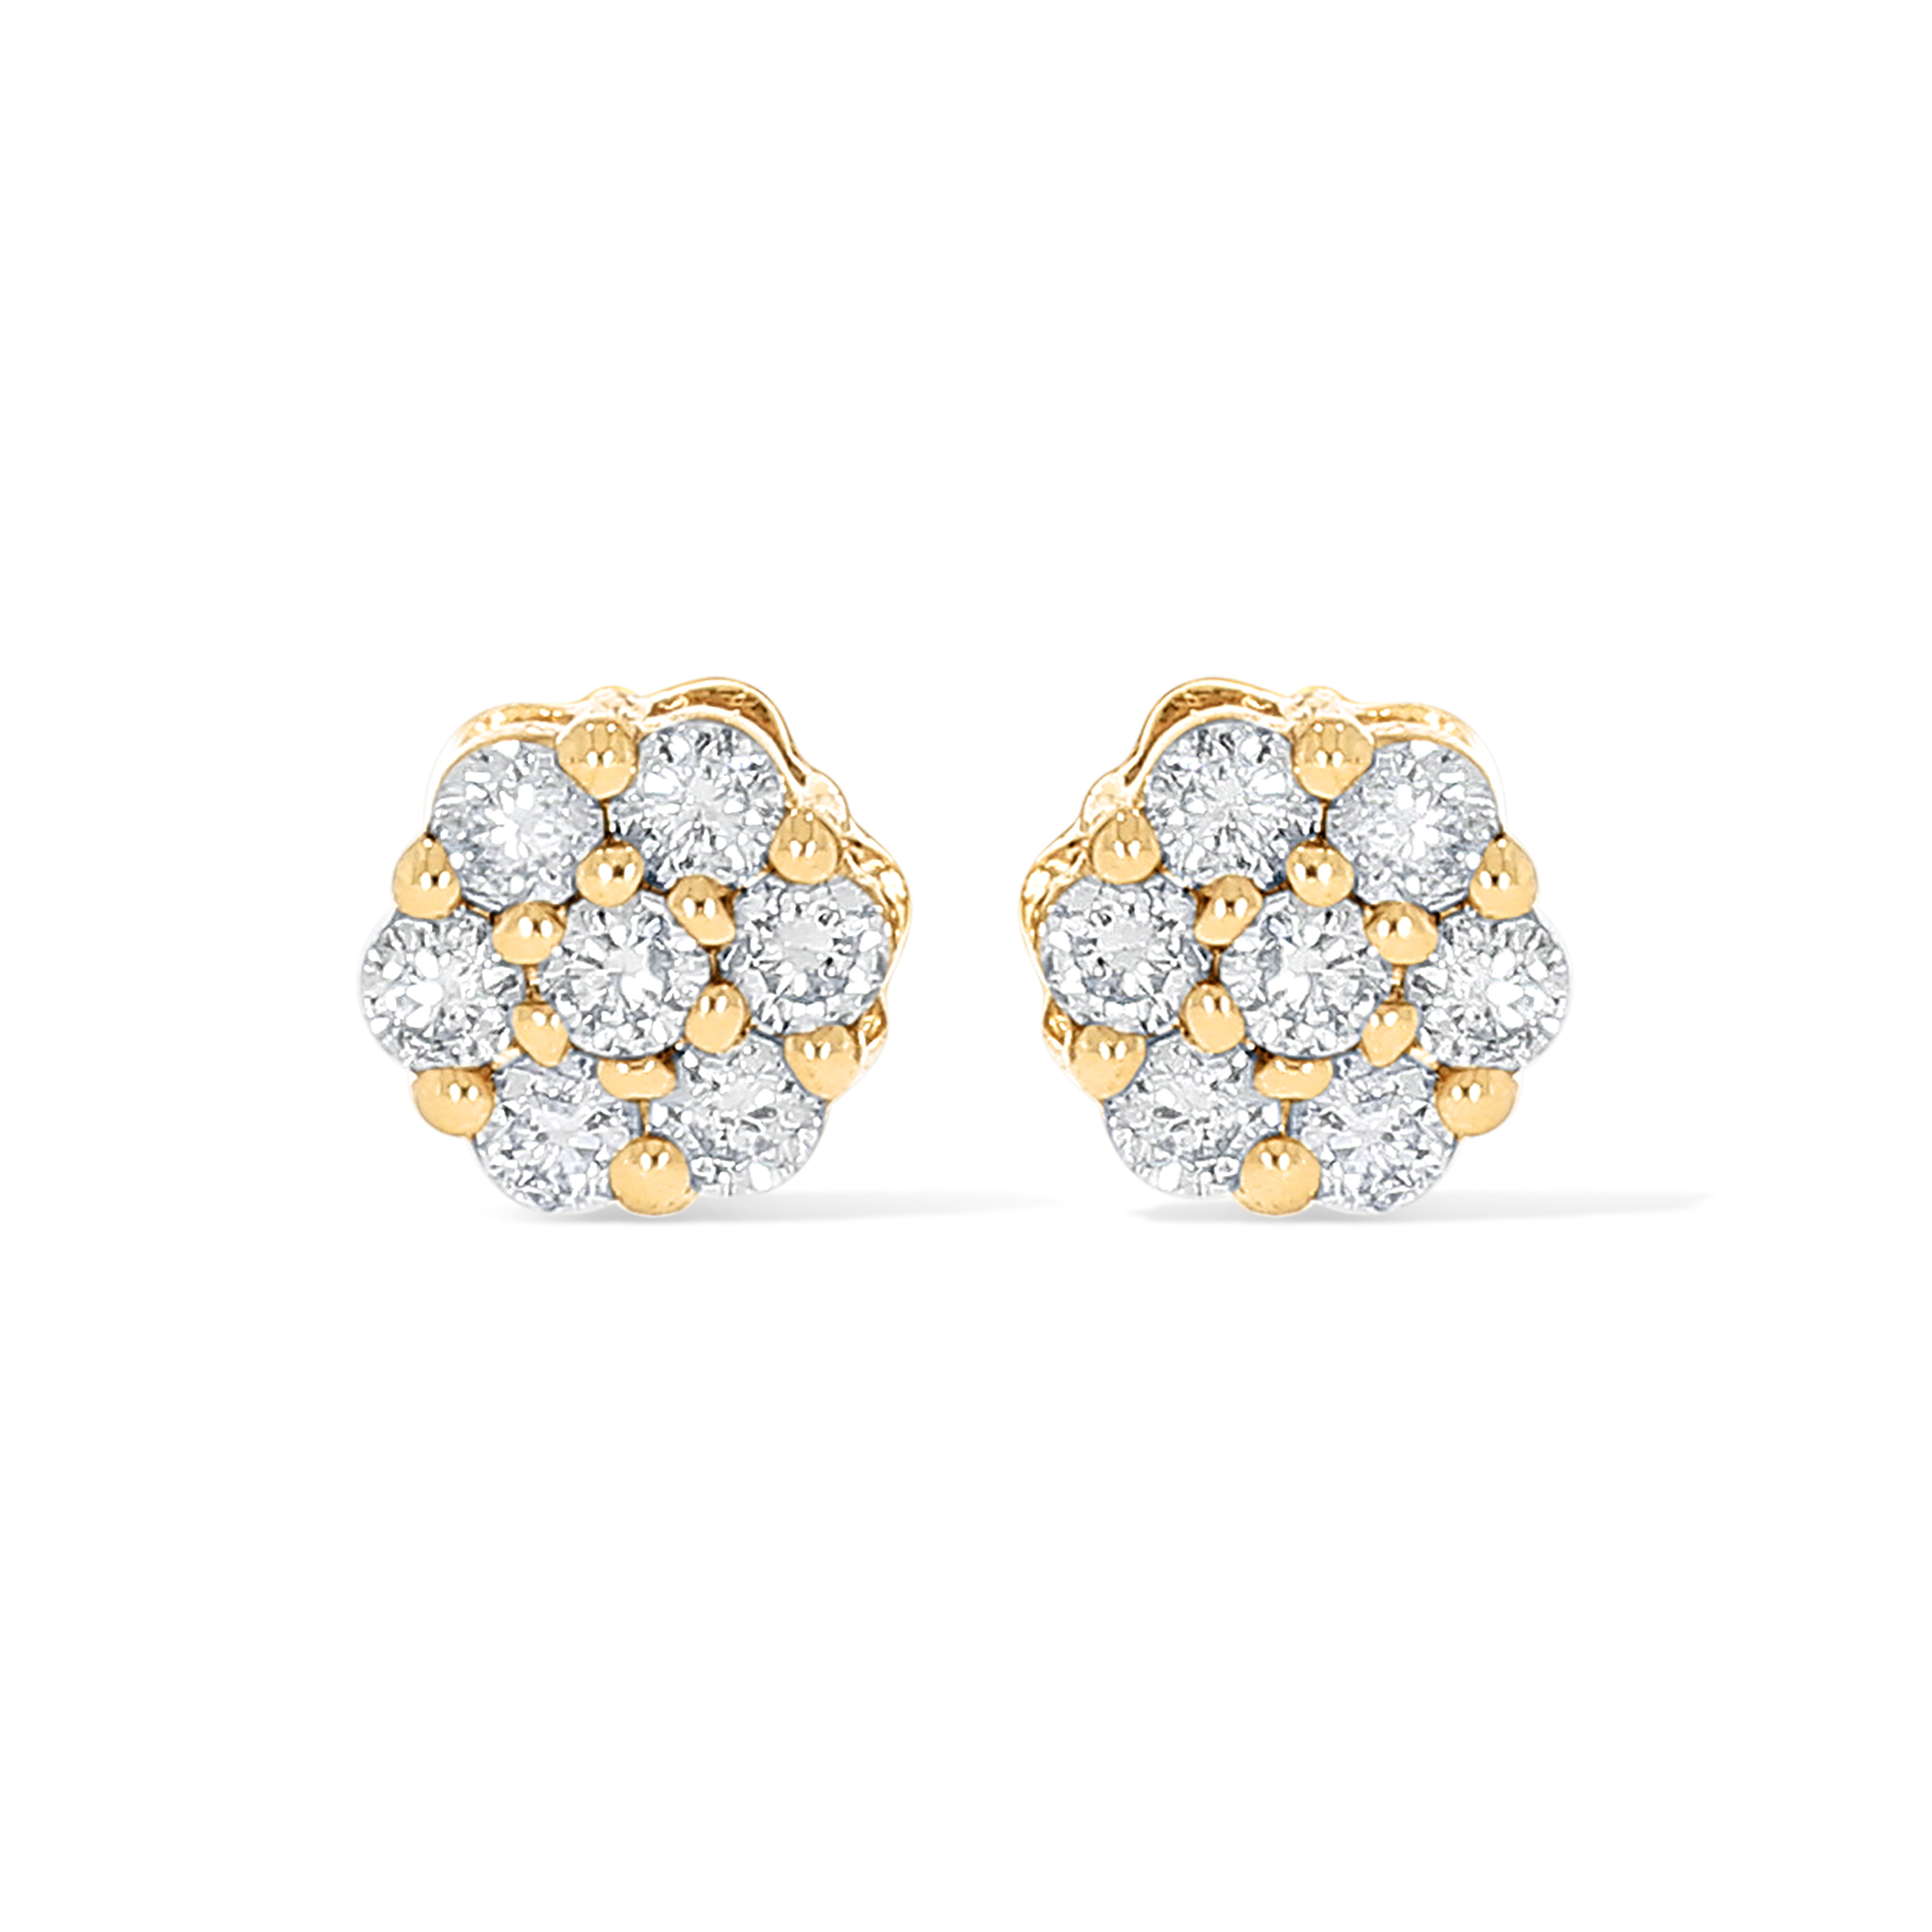 Round Cluster Diamond Earrings 0.18 ct. 10k Yellow Gold